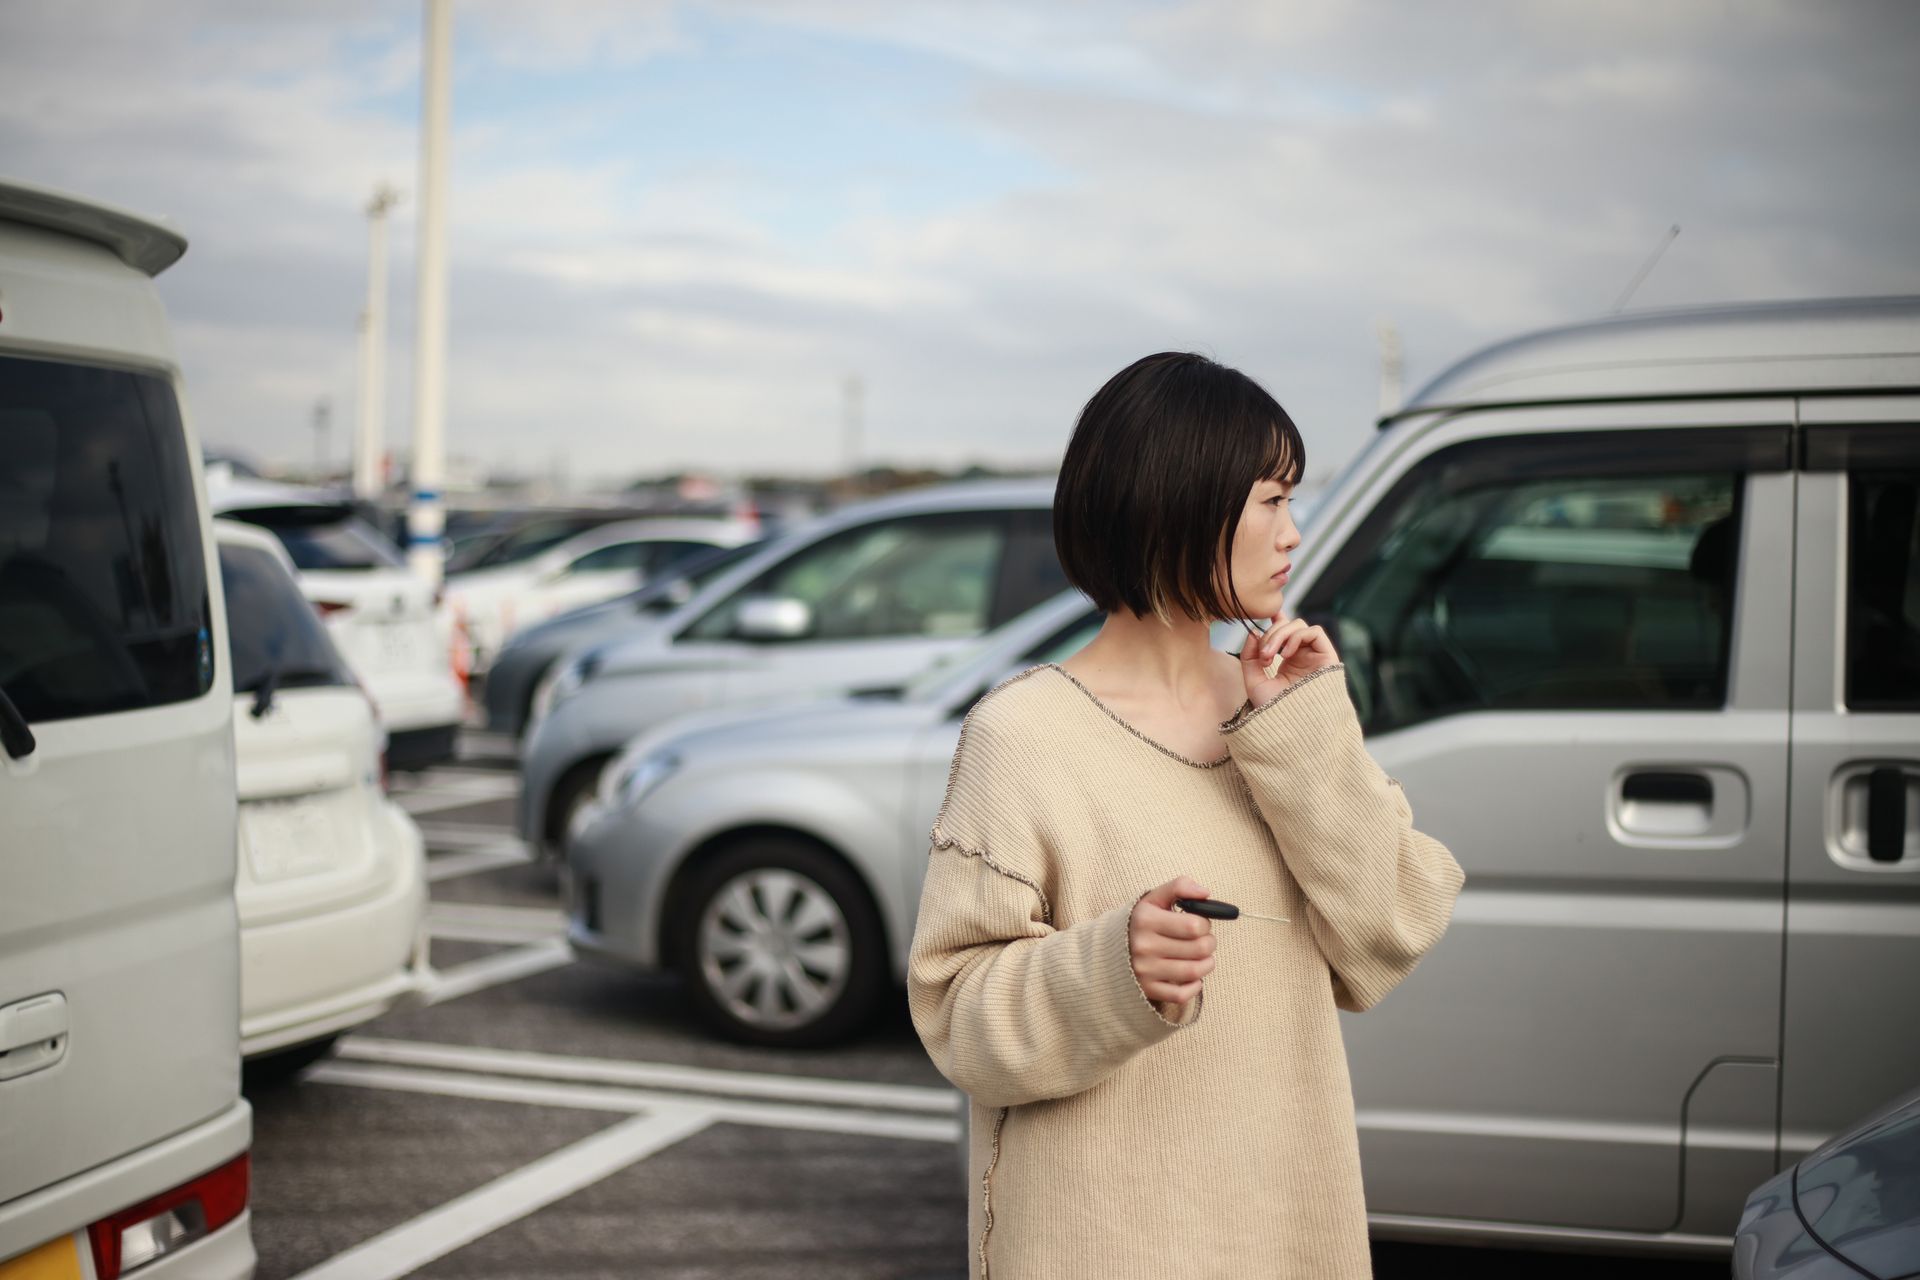 A woman is standing in a parking lot next to a van.